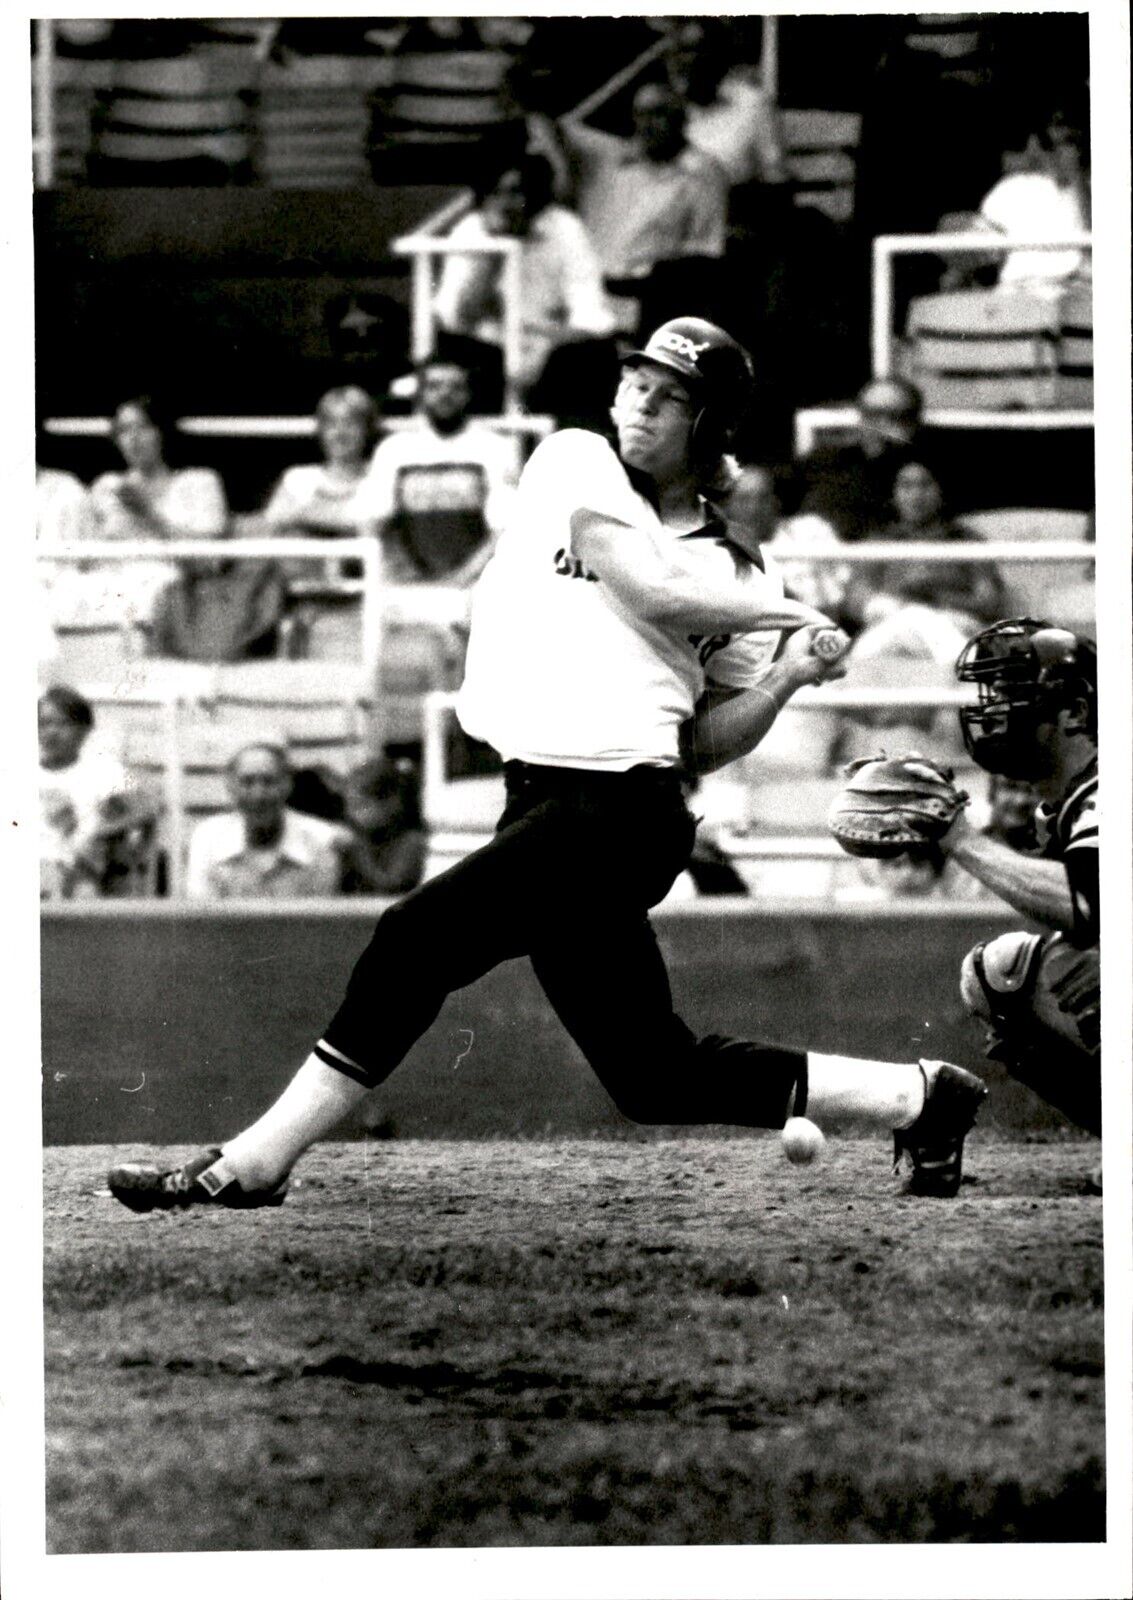 LD324 Orig Ronald Mrowiec Photo KEVIN BELL 1976-80 CHICAGO WHITE SOX 3RD BASE